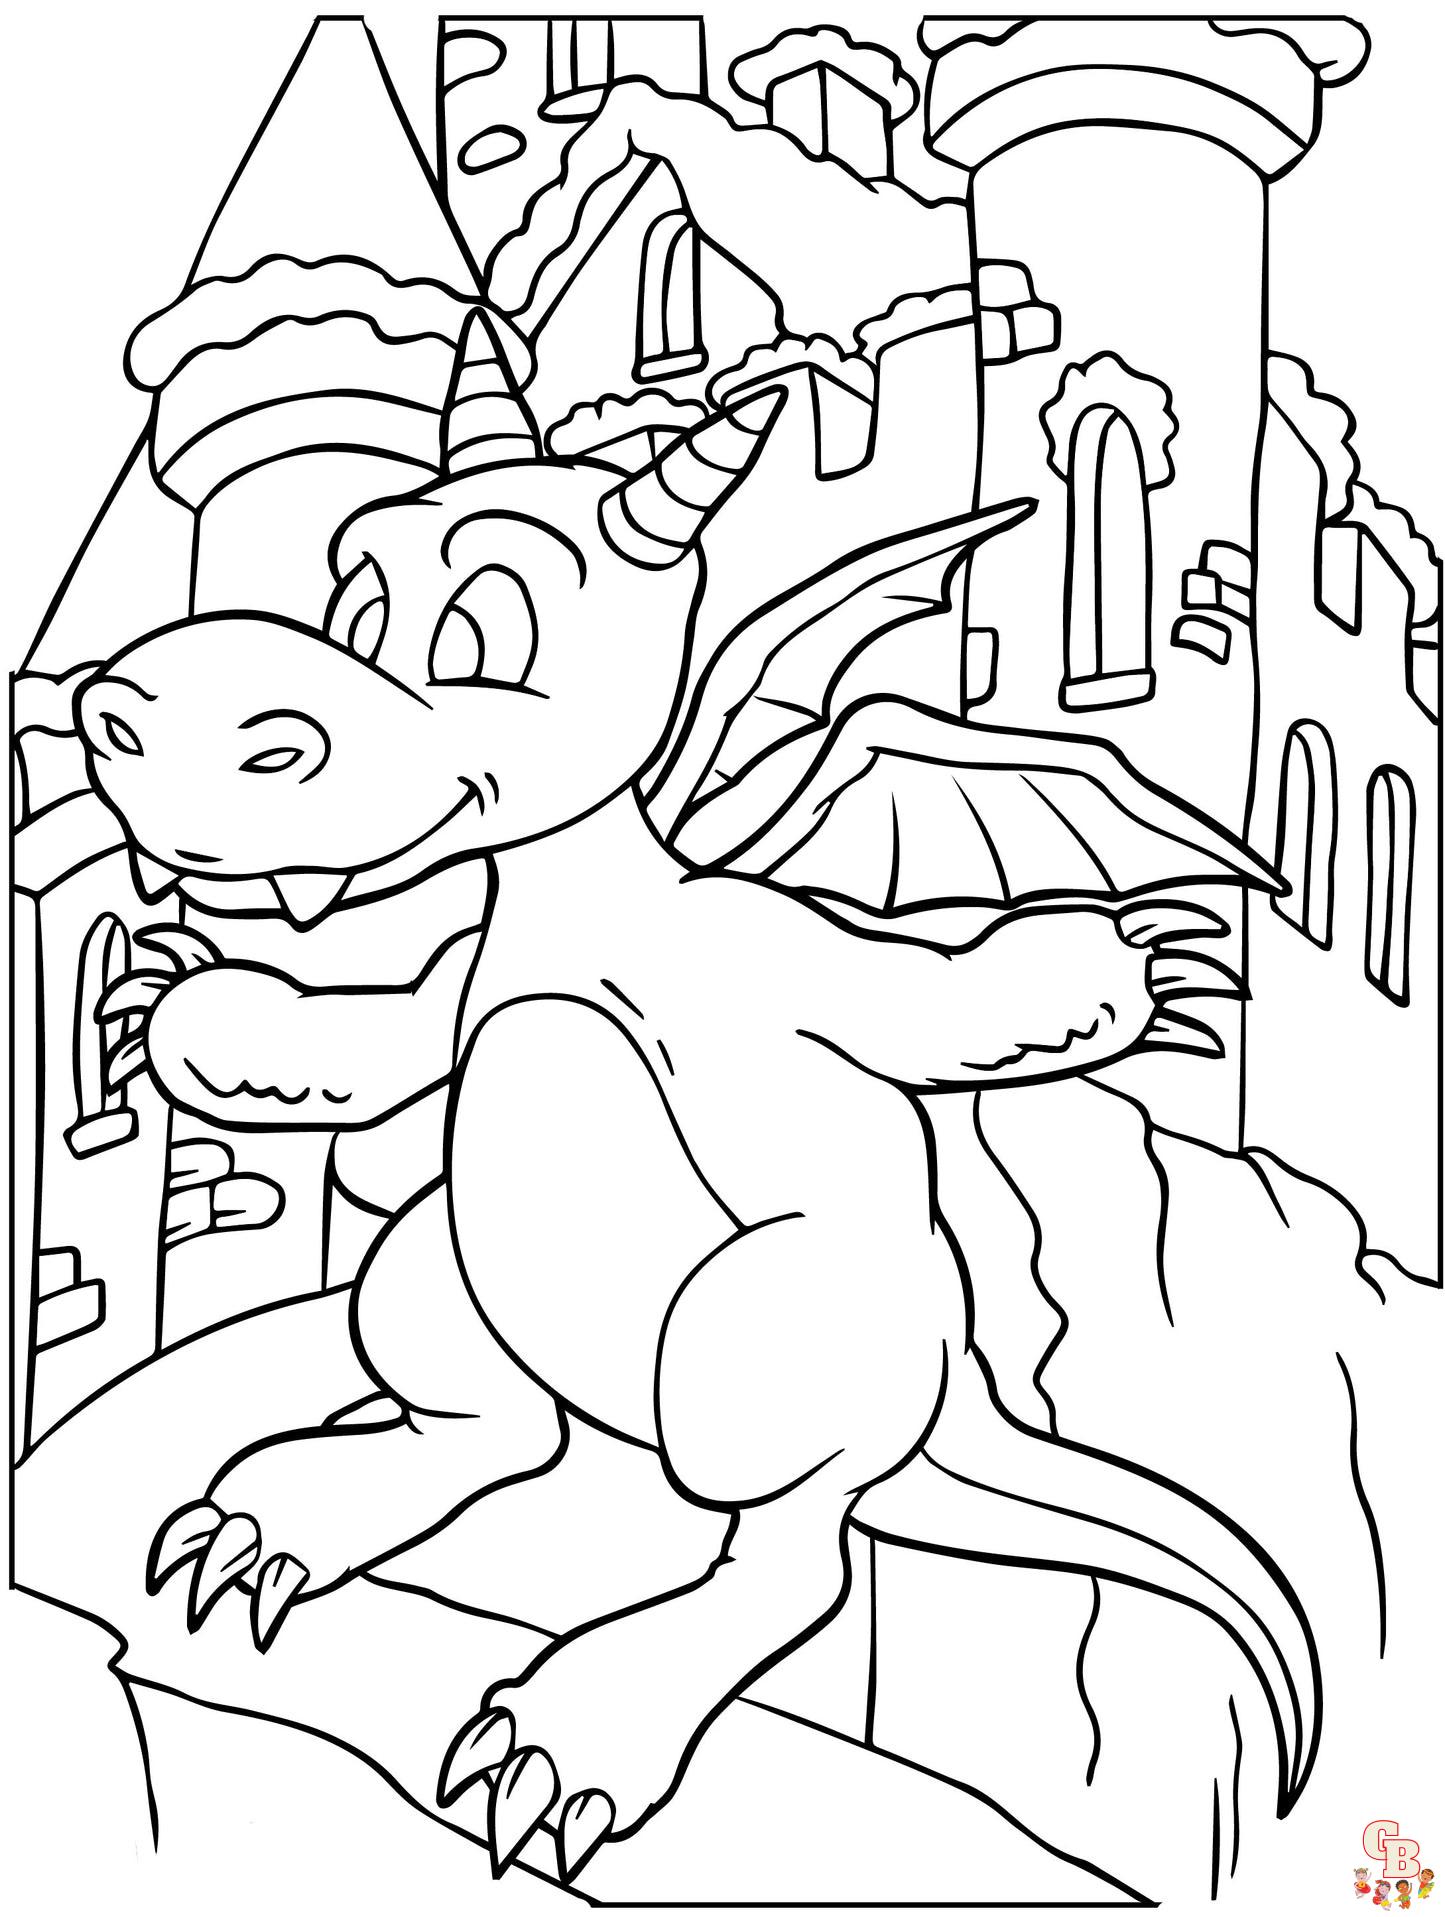 Puff the Magic Dragon Coloring Pages 5